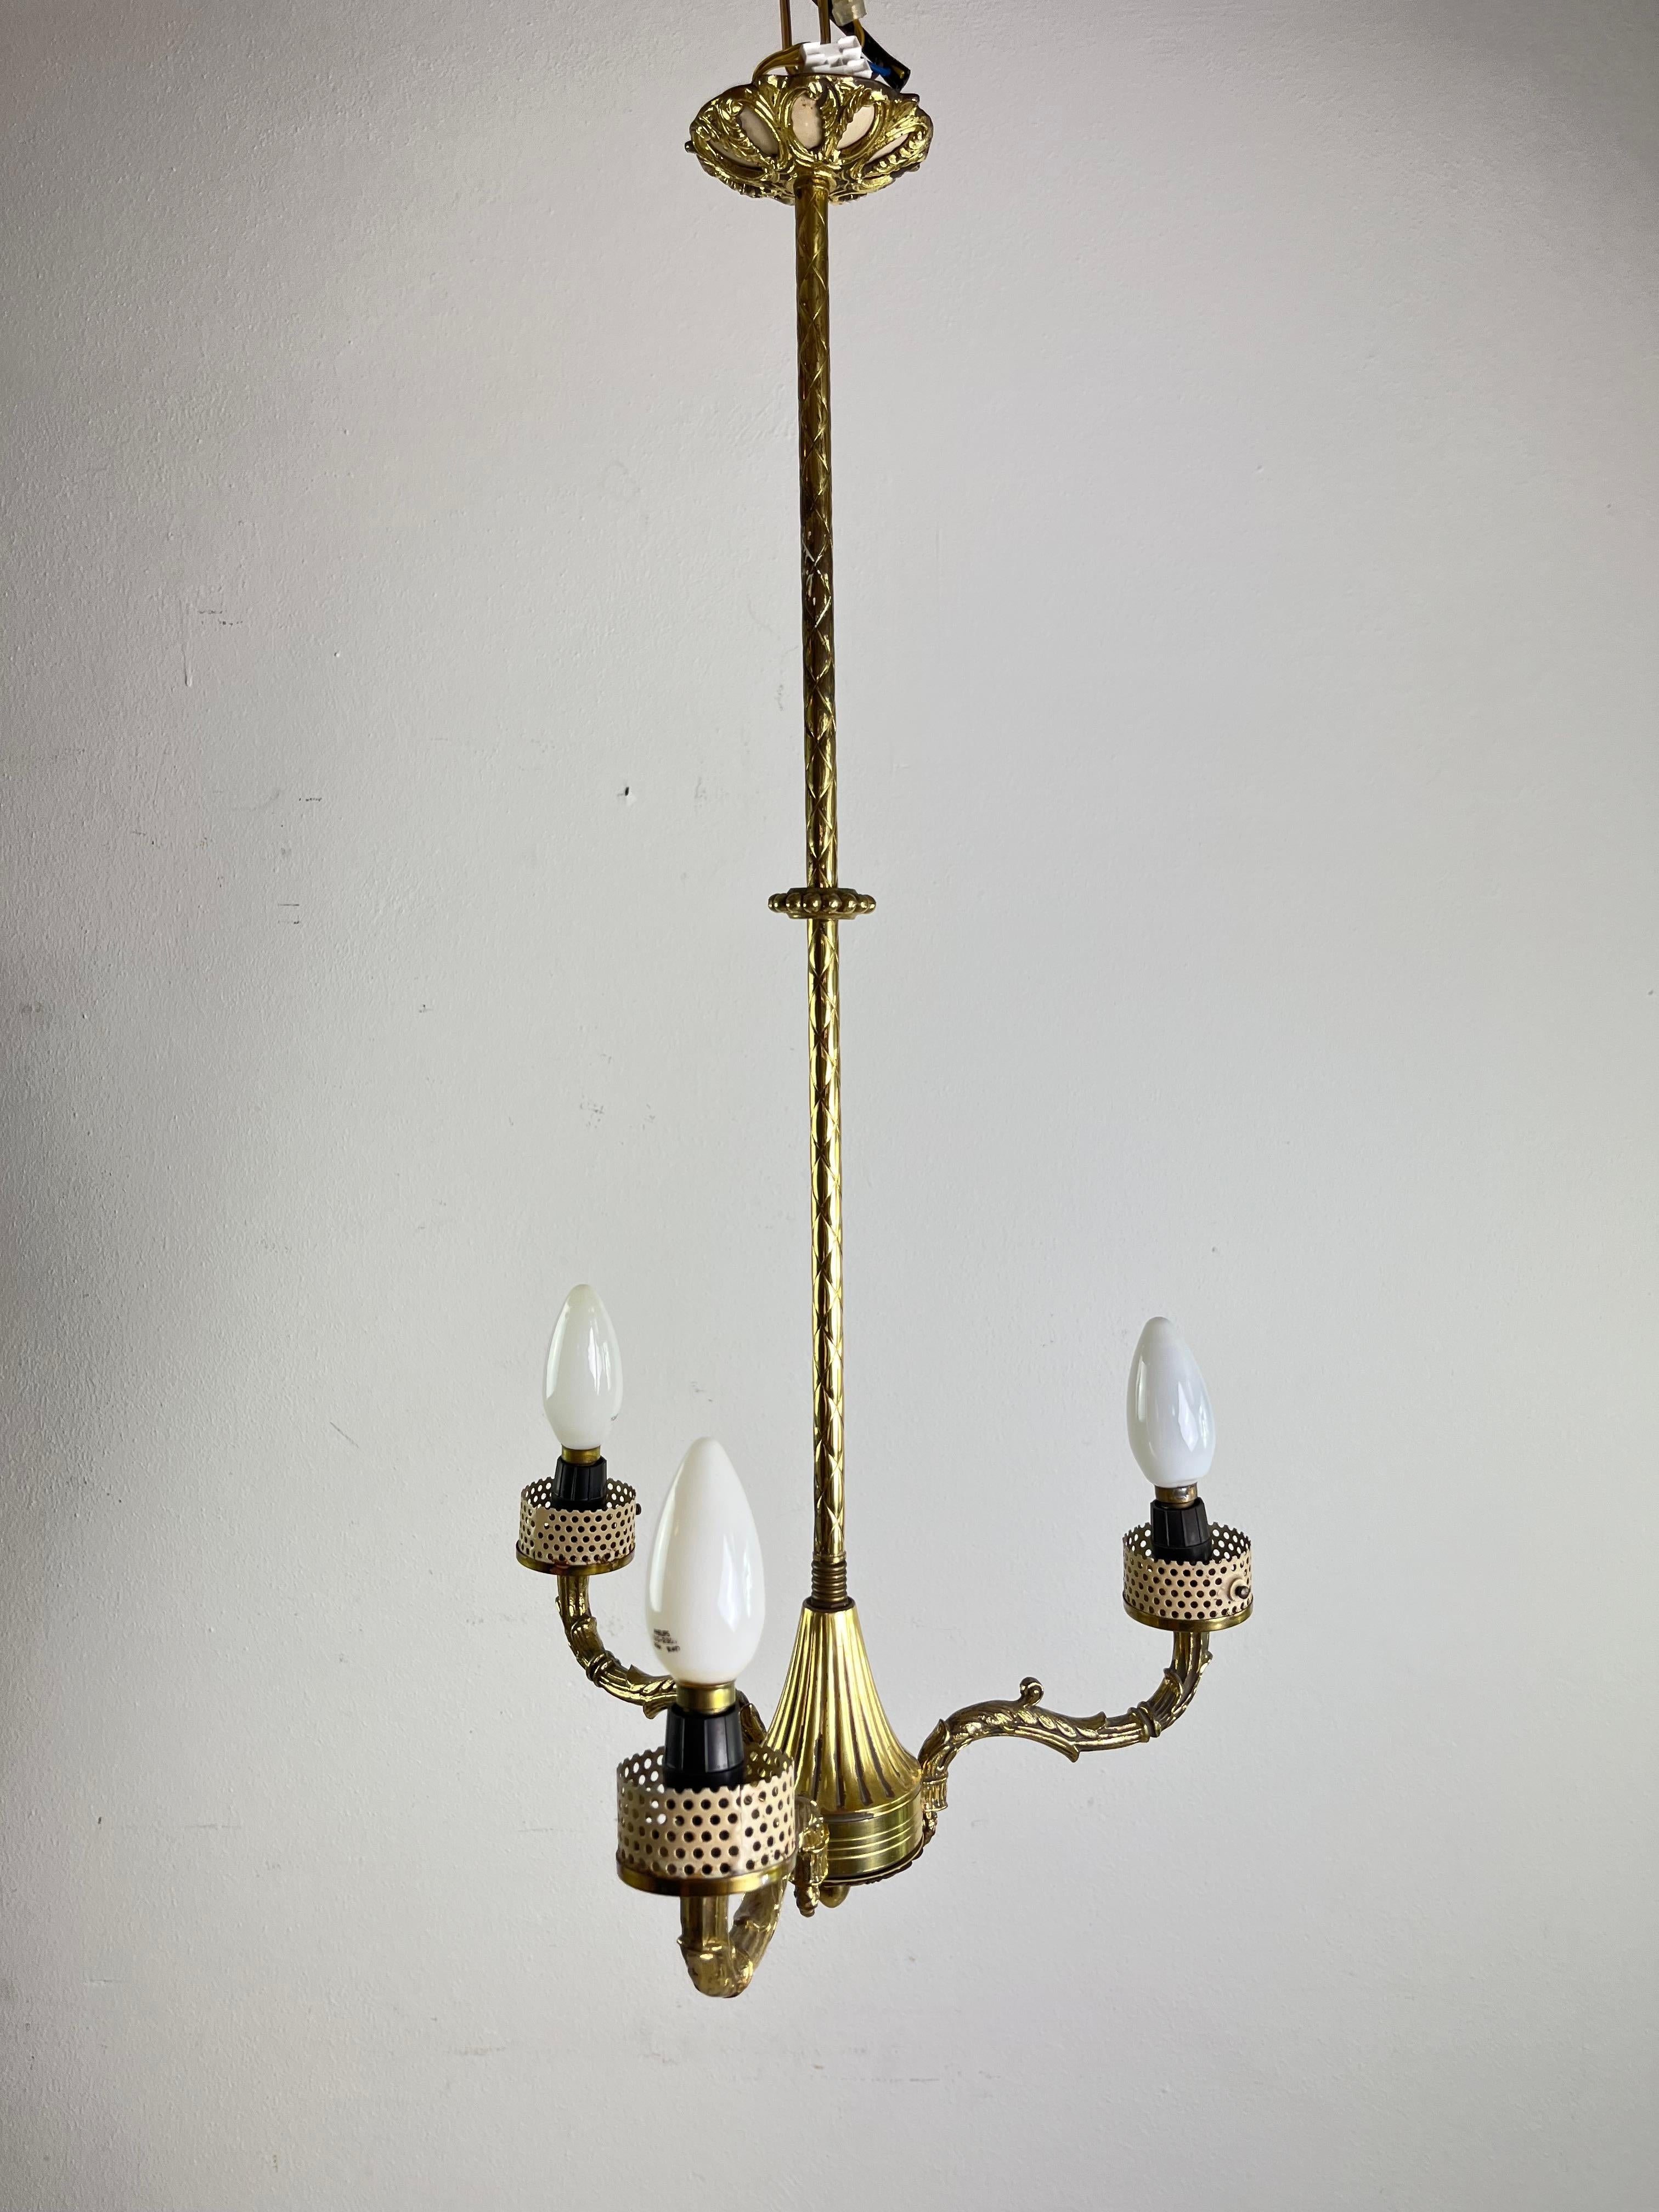 Mid-Century 3-Light Brass And Glass Chandelier  Attributed To Stilnovo 1950s For Sale 4